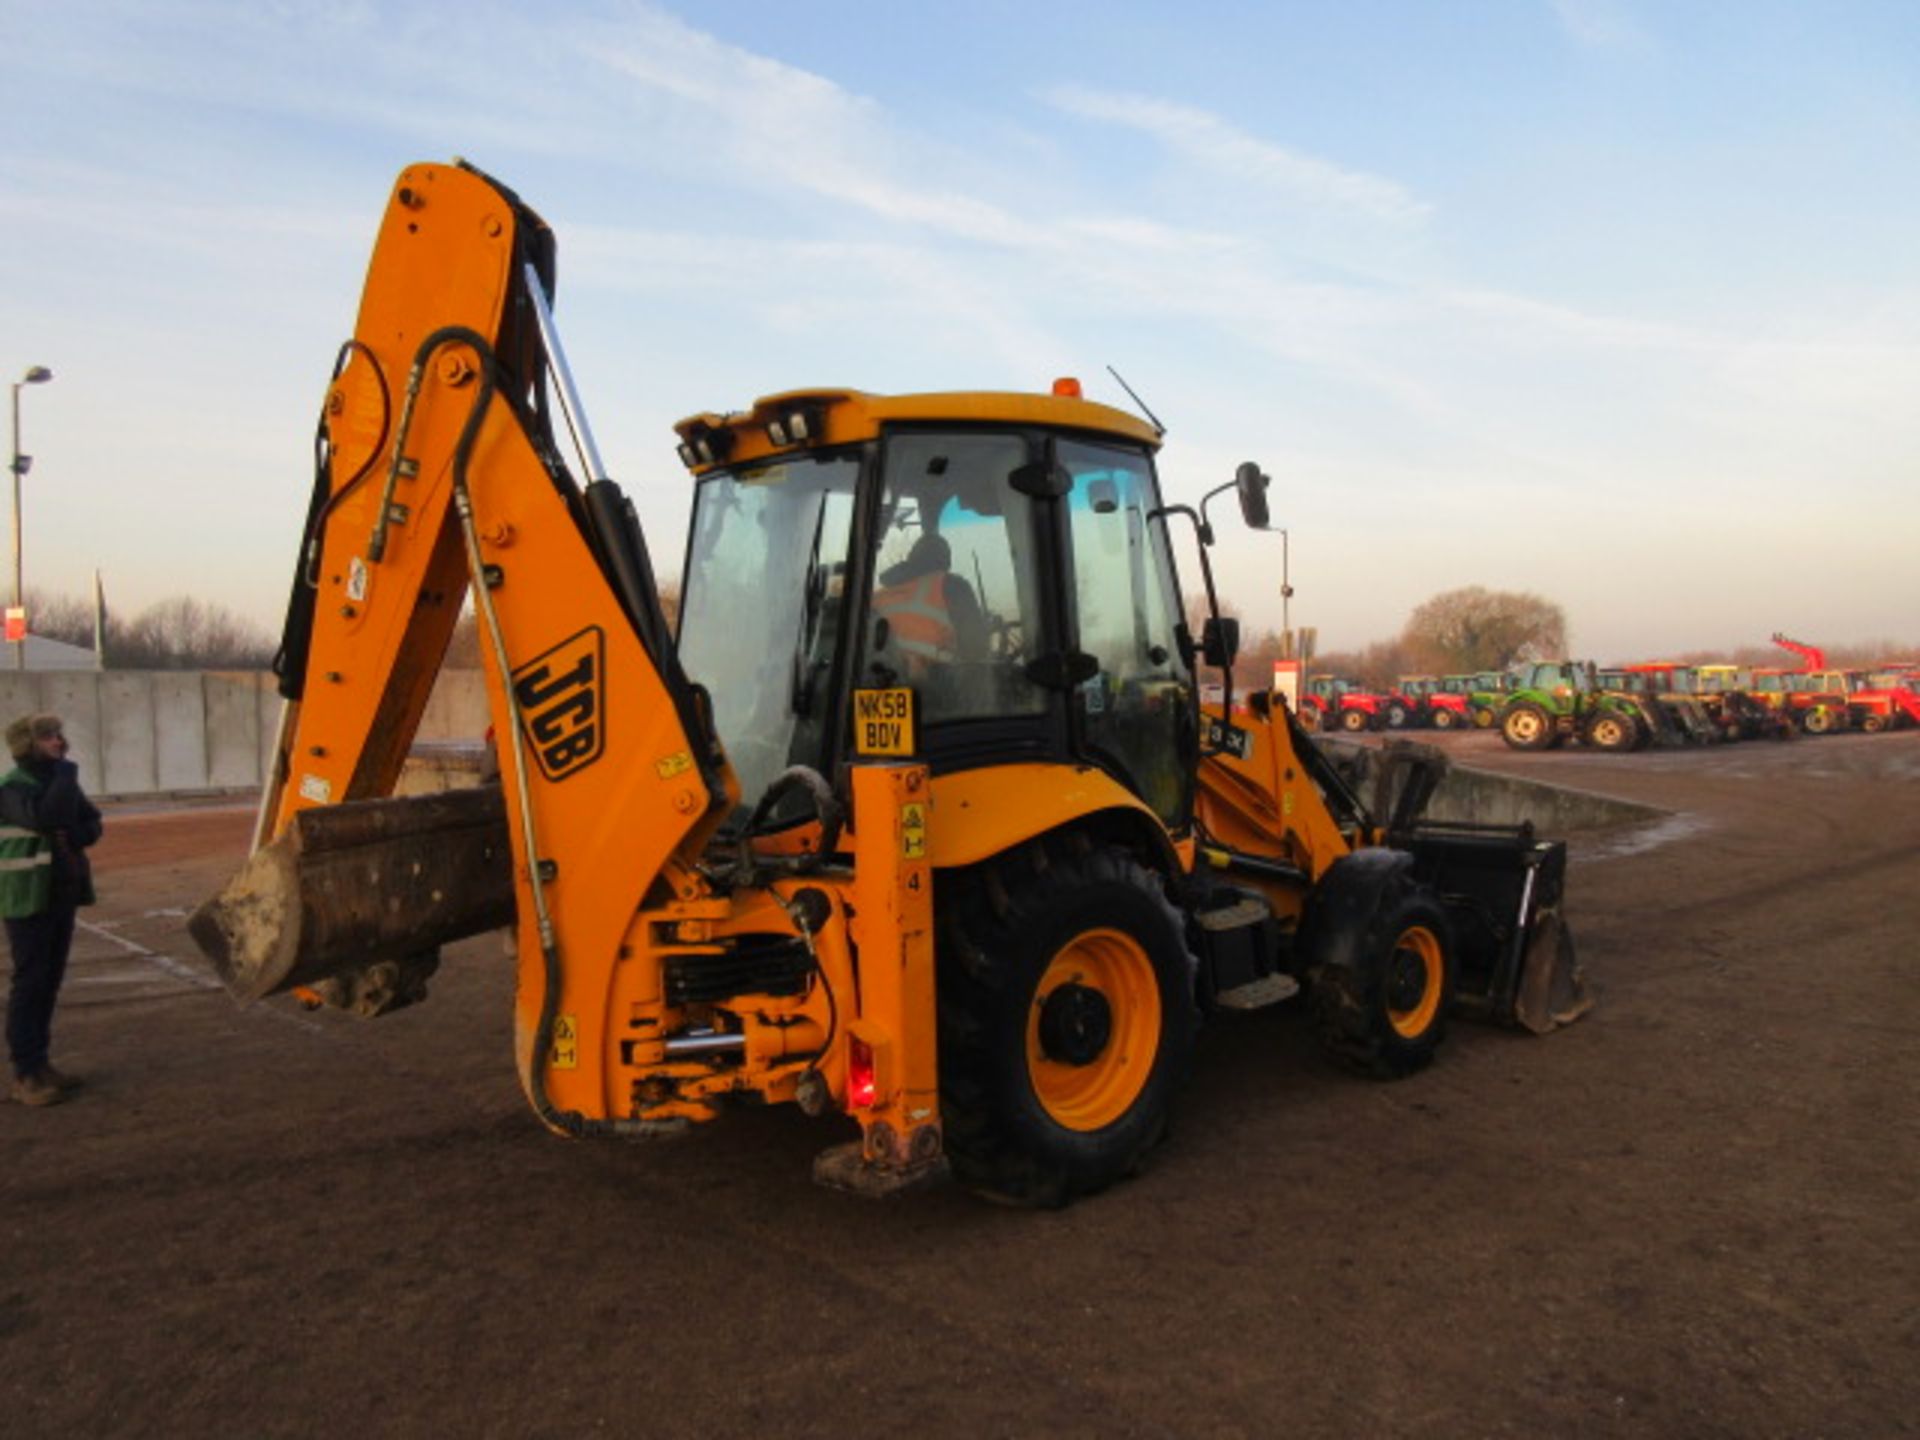 2008 JCB 3CX Sitemaster c/w Piped, Quick Hitch, 4 in 1 Bucket Ser. No. 81346092 - Image 6 of 8